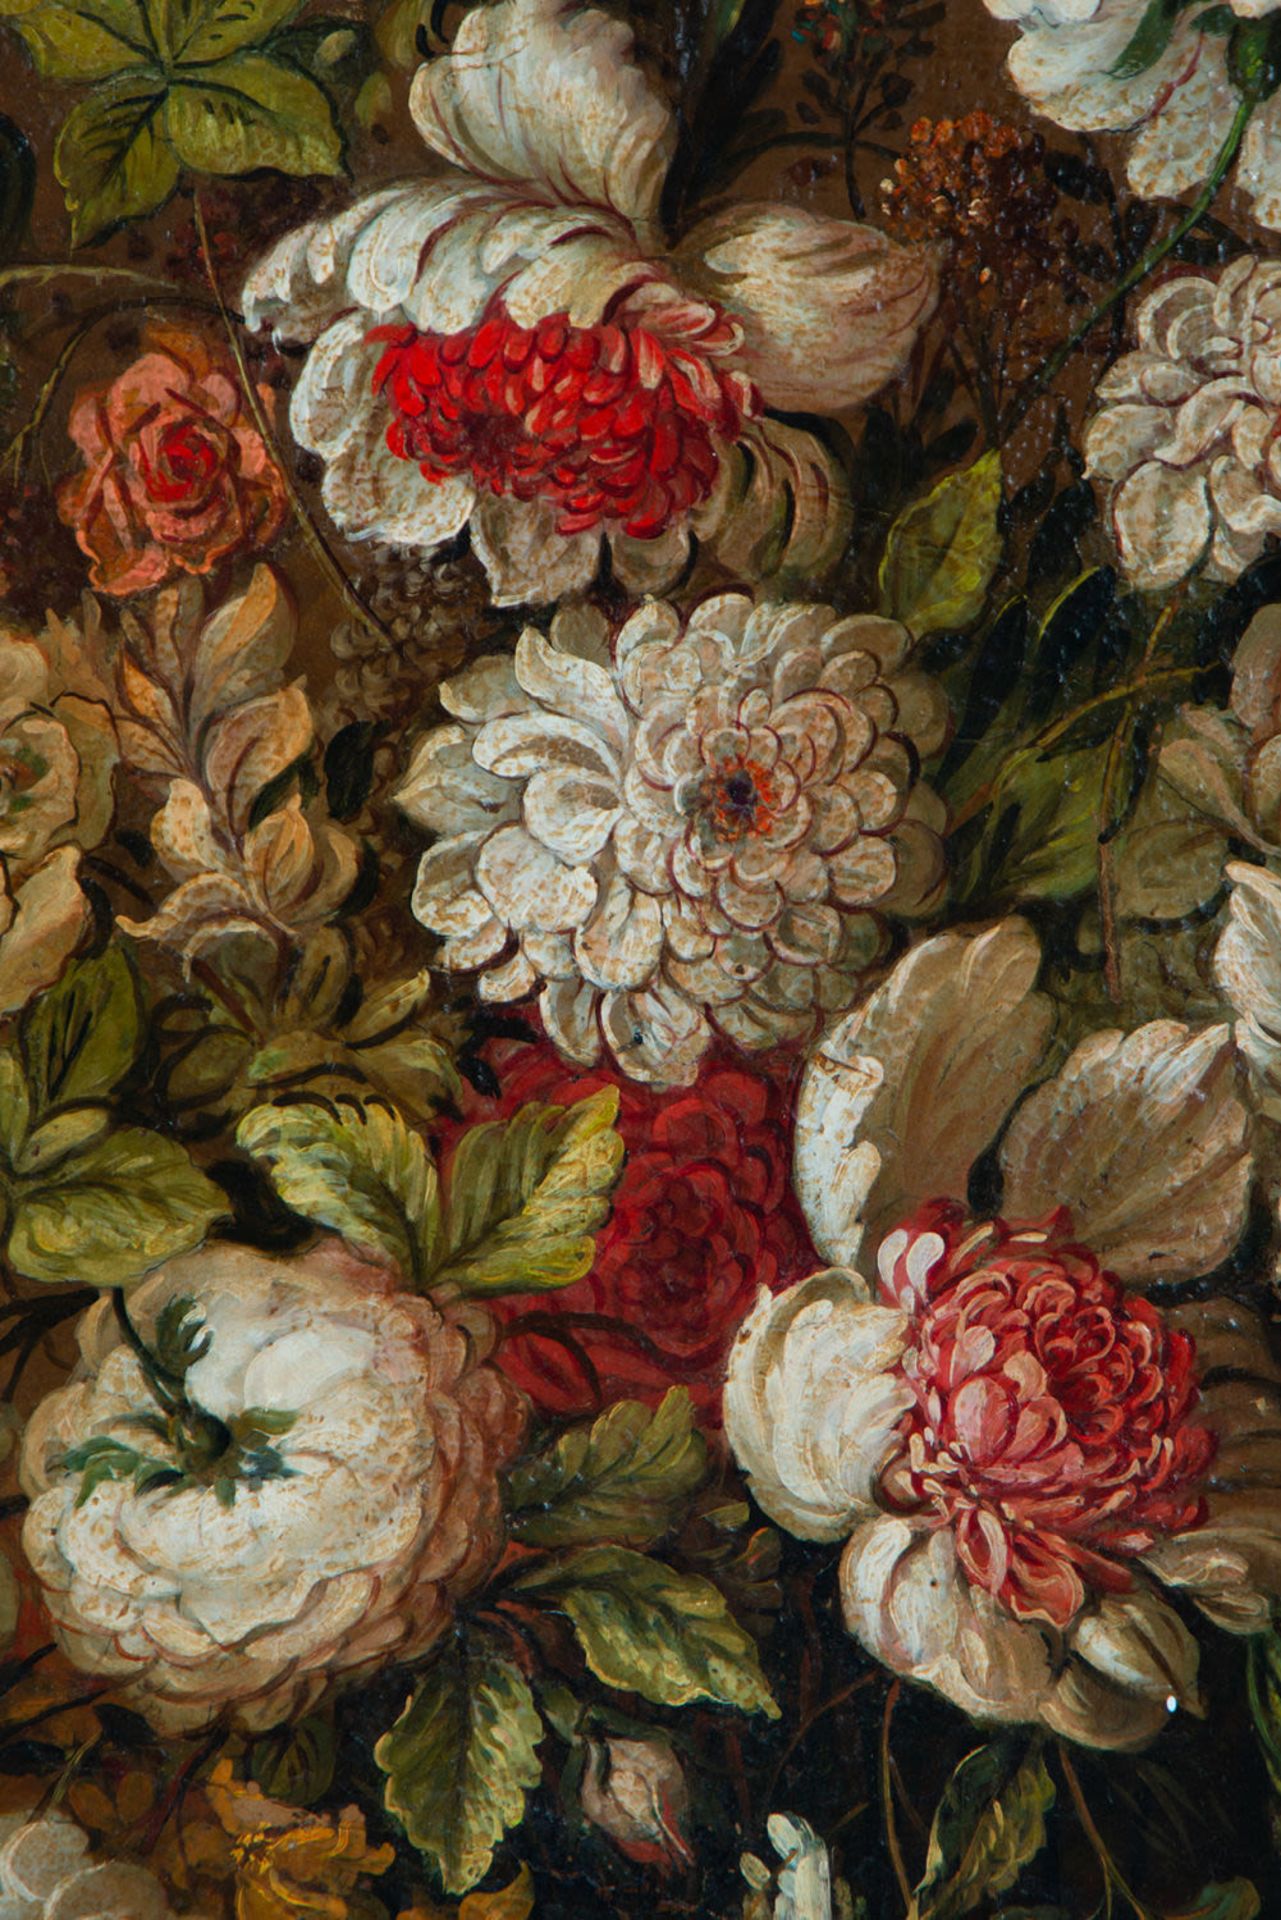 Pair of large still lifes of Flowers, Dutch school of the 17th - 18th century - Image 19 of 20